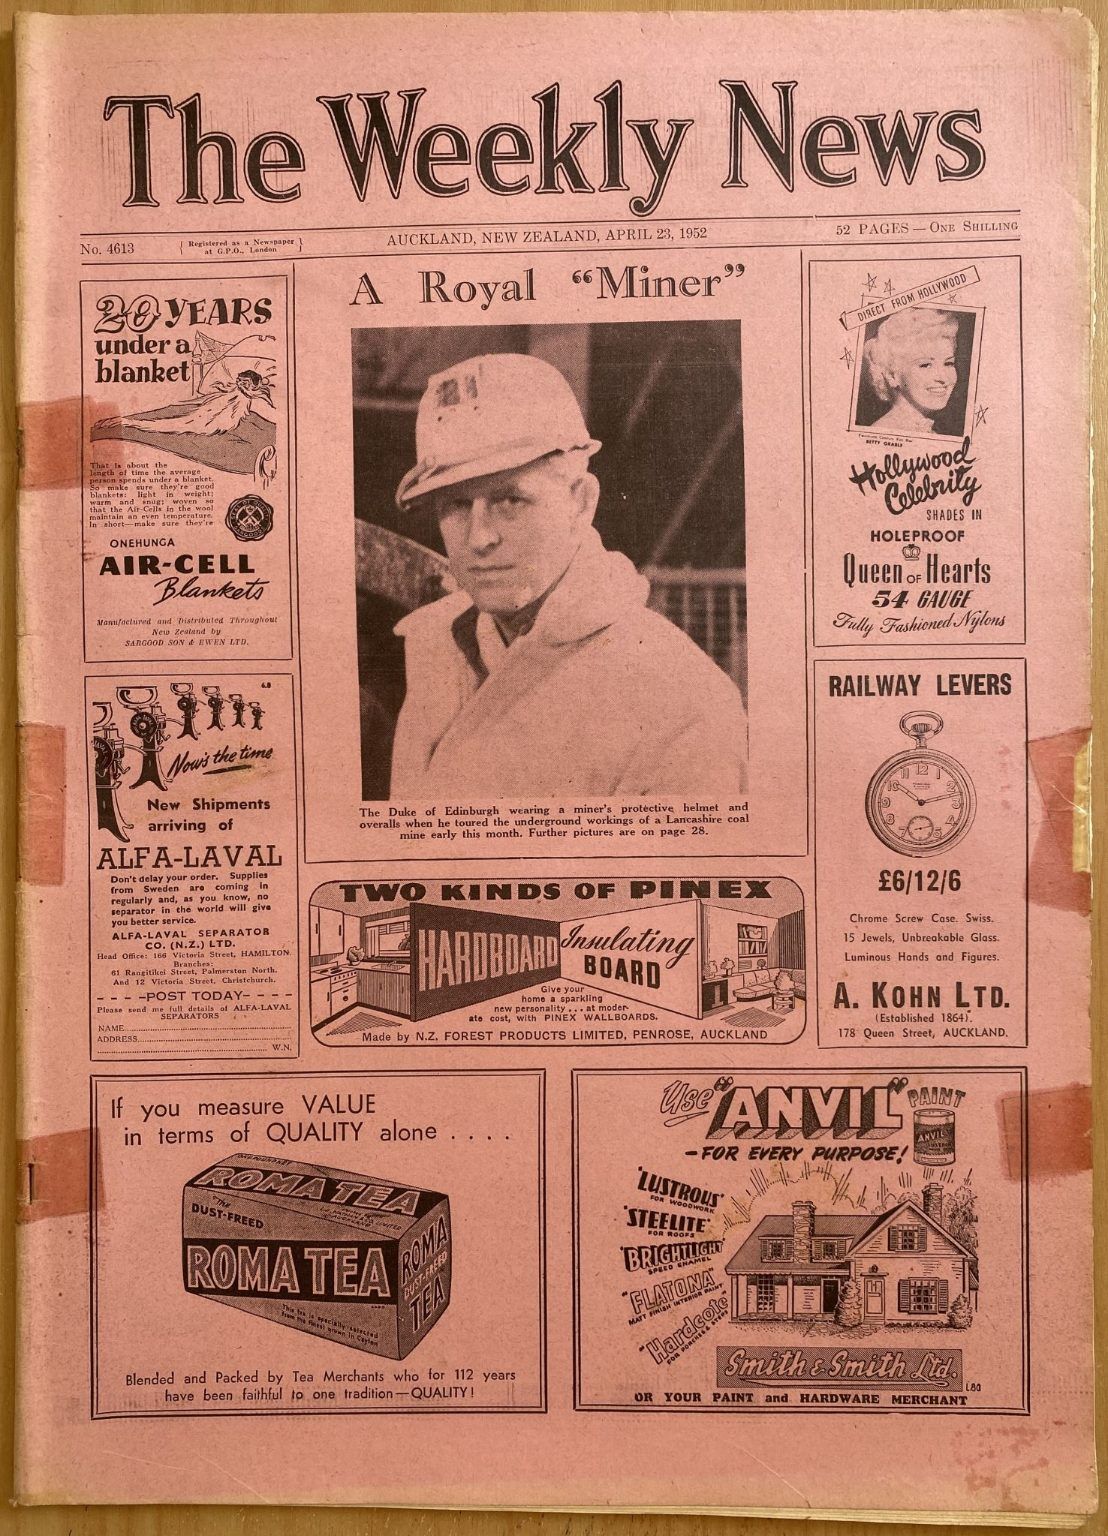 OLD NEWSPAPER: The Weekly News - No. 4613, 23 April 1952